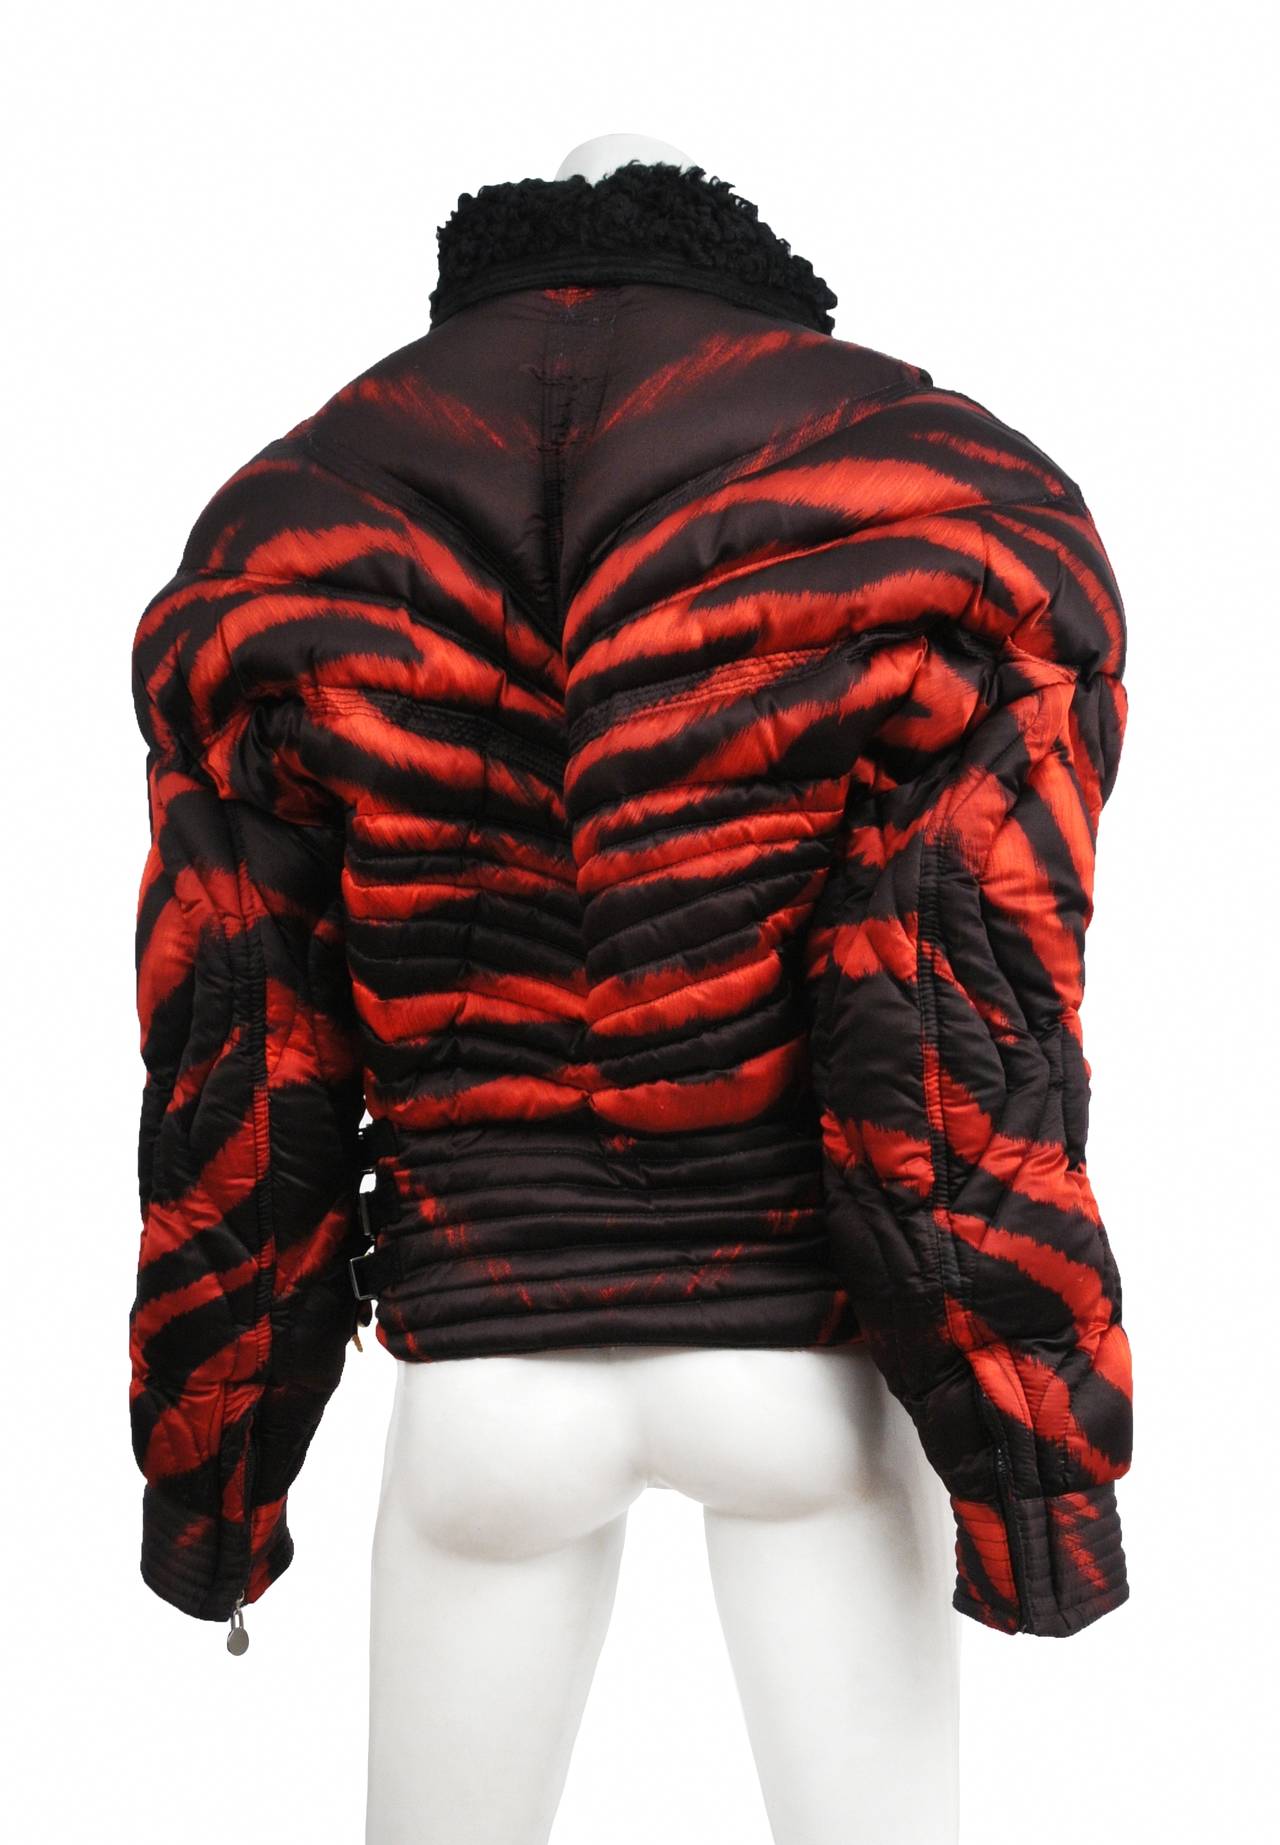 Gianni Versace rare apres quilted ski jacket with red and black tiger print. Corset style waist has leather and gold bondage buckles. The zipper pulls through out are adorned with the medusa icon. Jacket is trimmed in black suede with mongolian fur